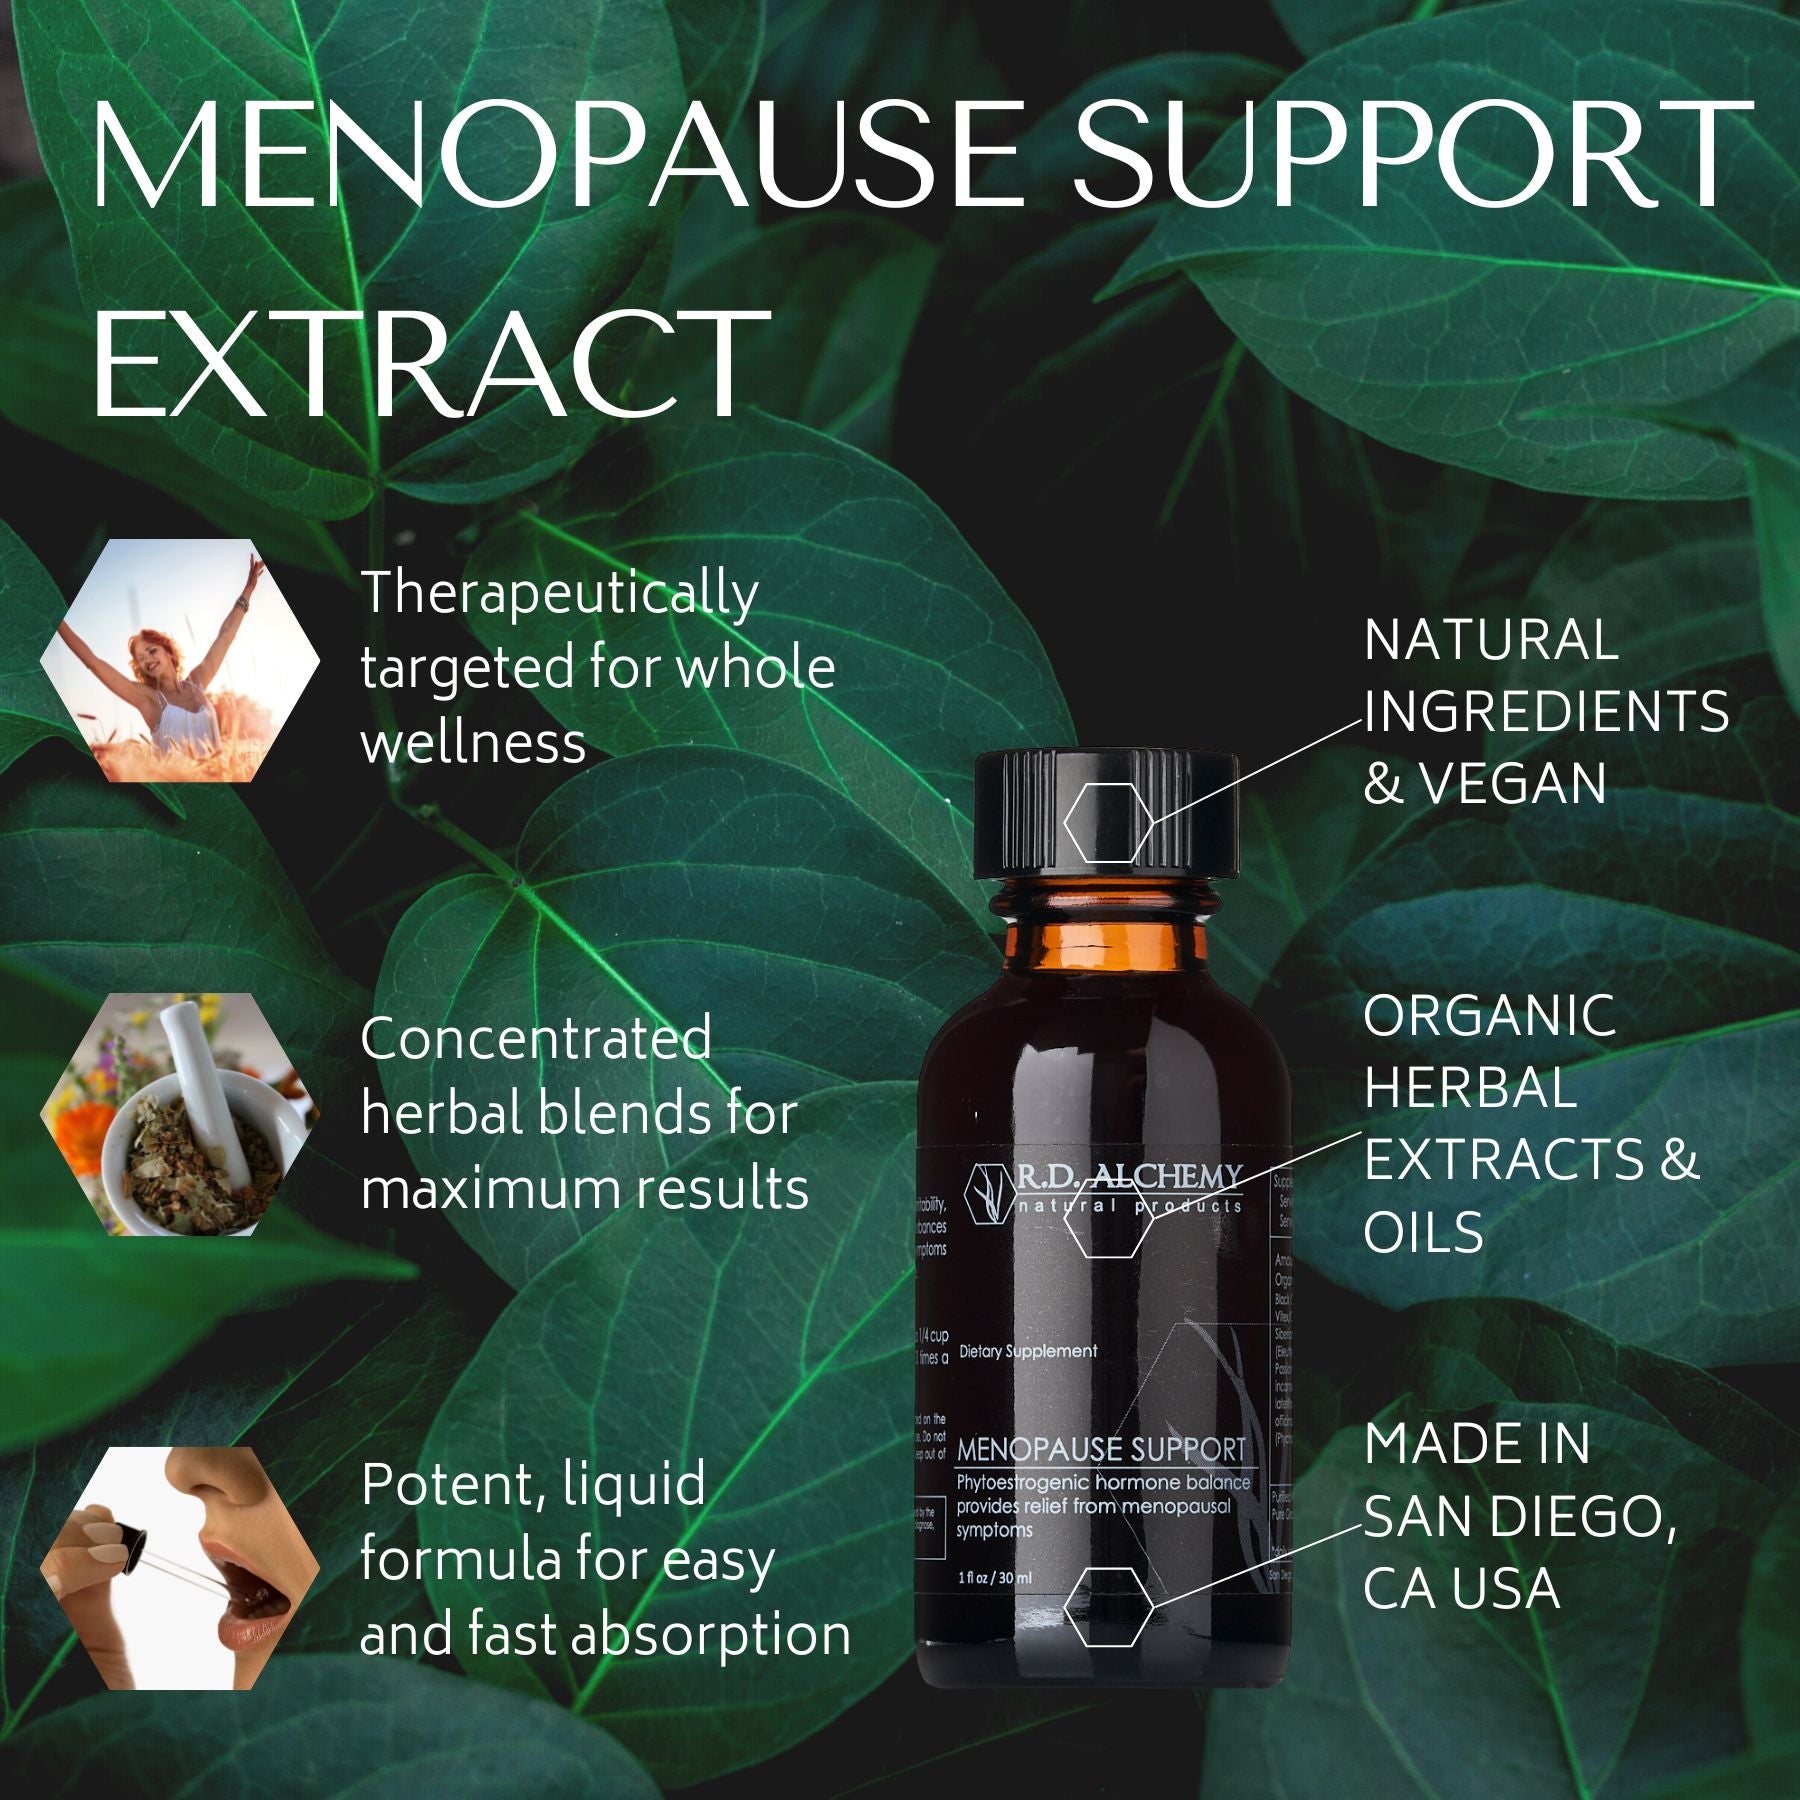 Menopause Support Extract